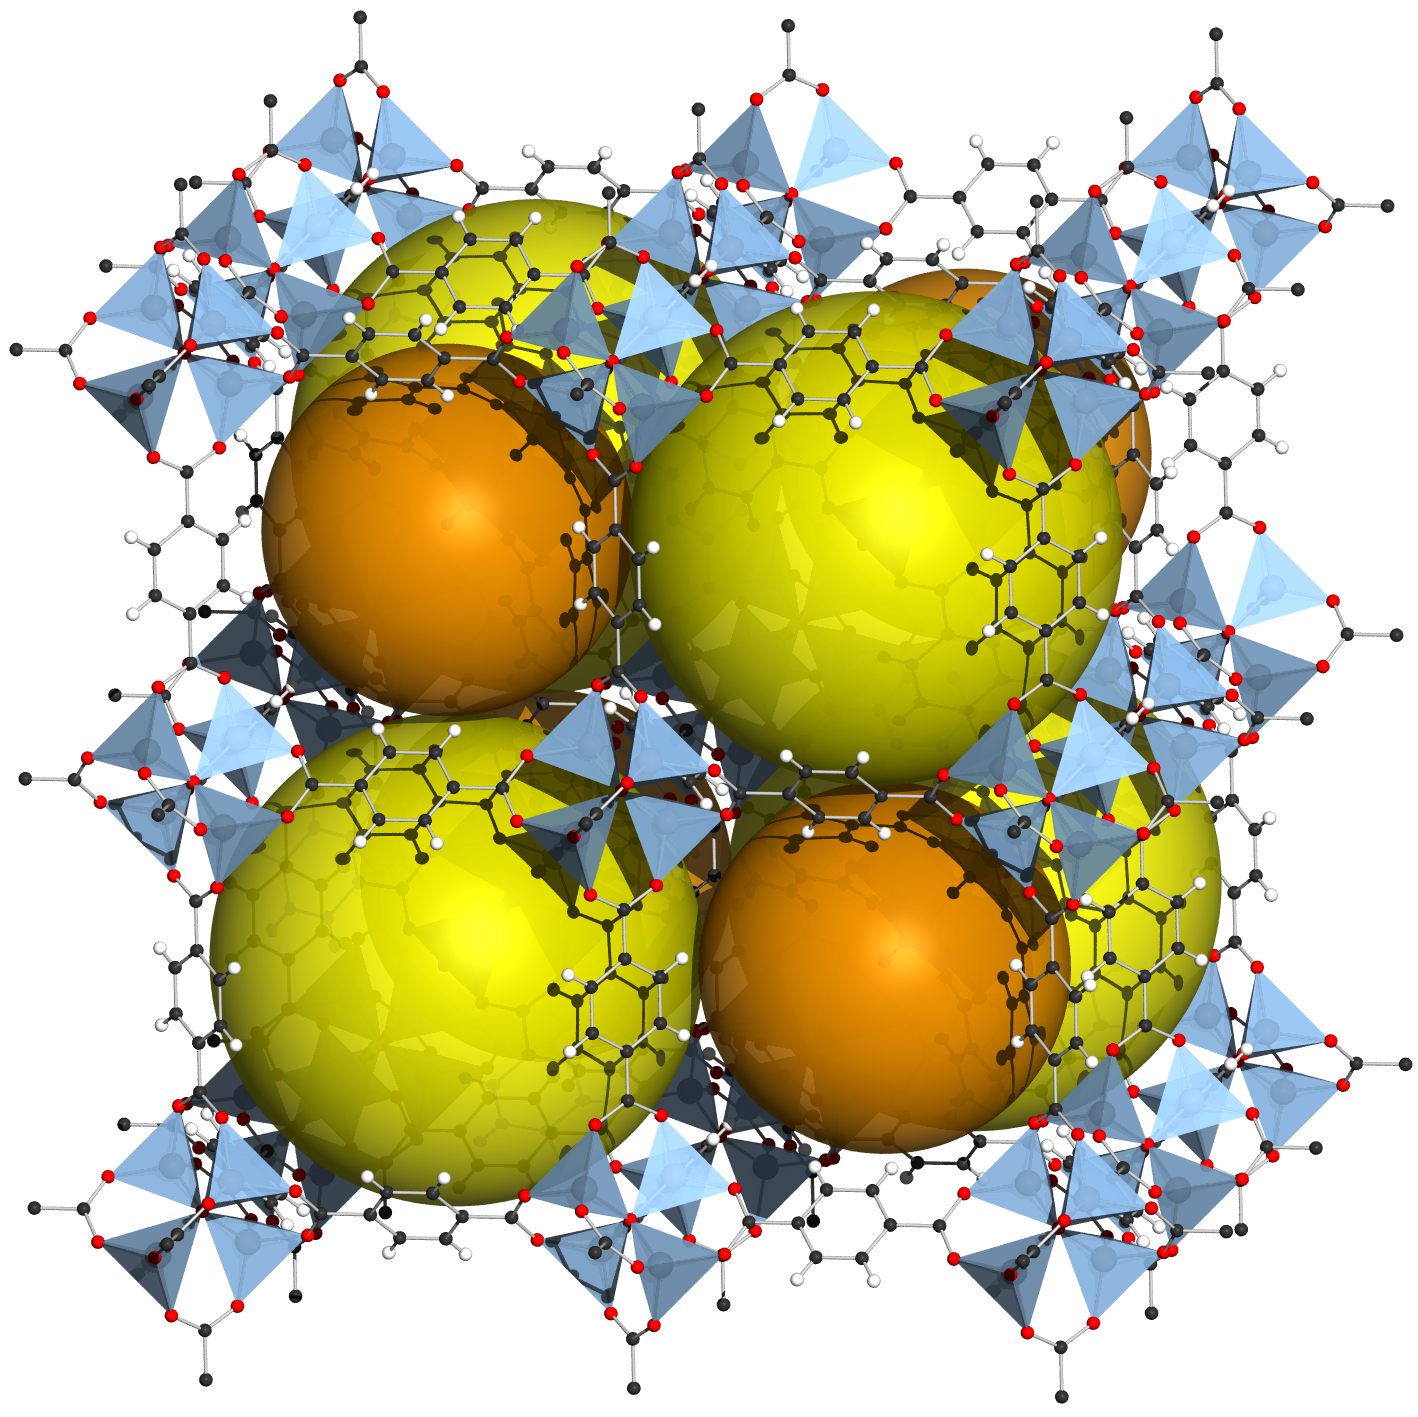 Fig. 1: Example of a cubic molecular unit cell structure (8 cells) in MOF-5. Yellow and orange spheres represent the internal pore volume contained in each pocket. Zinc atoms visible at nodes with organic linkers forming the edges. Source: Wikimedia